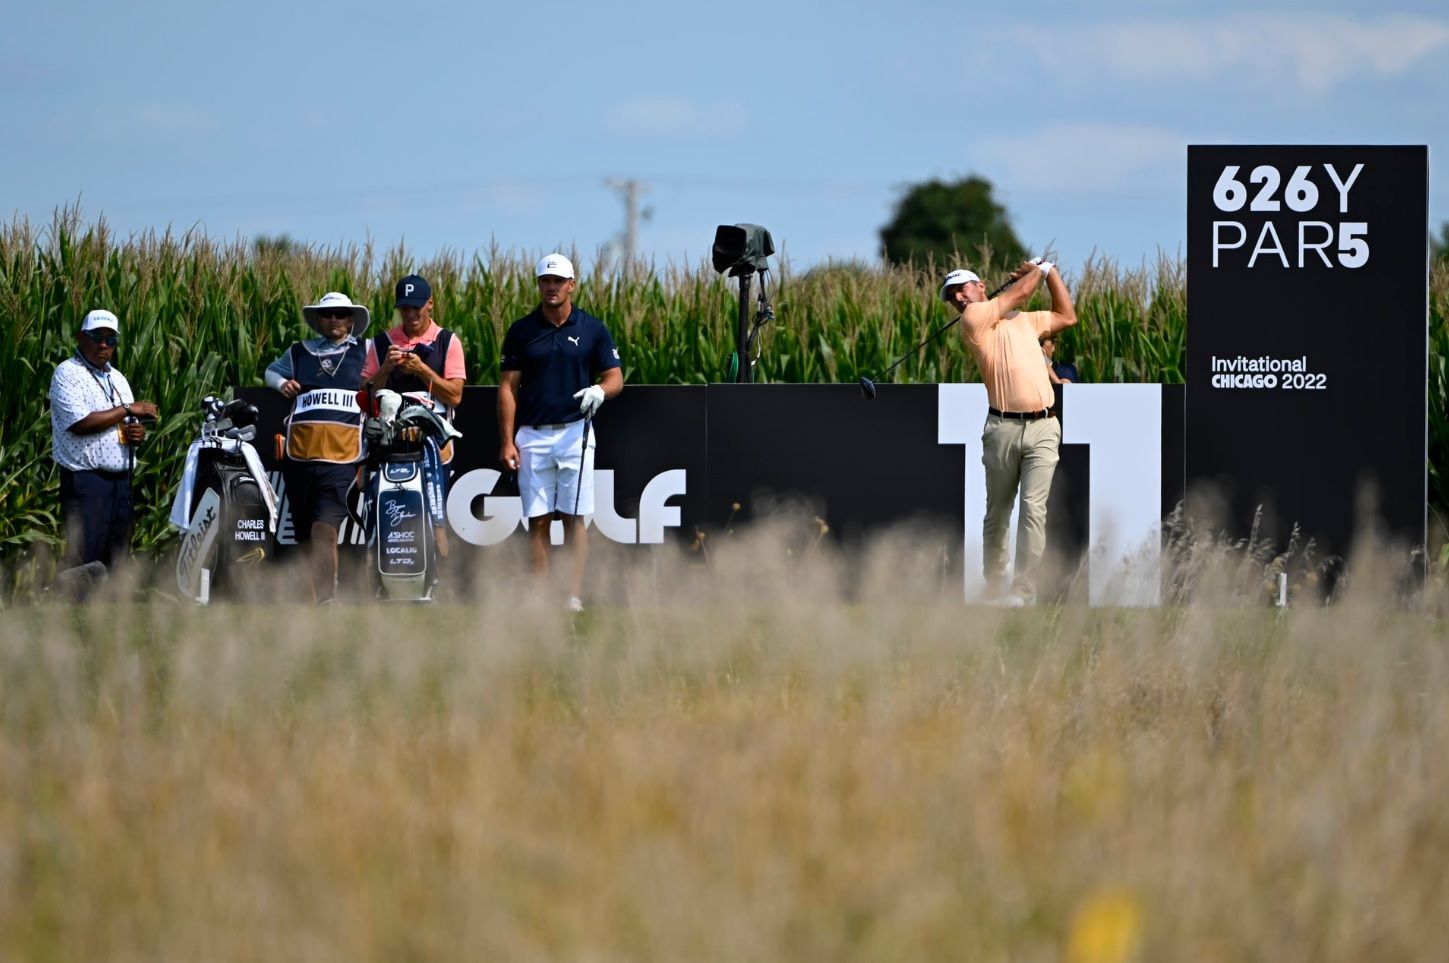 LIV Golf in Sugar Grove this weekend, DeChambeau says "no buyer's remorse" after leaving PGA